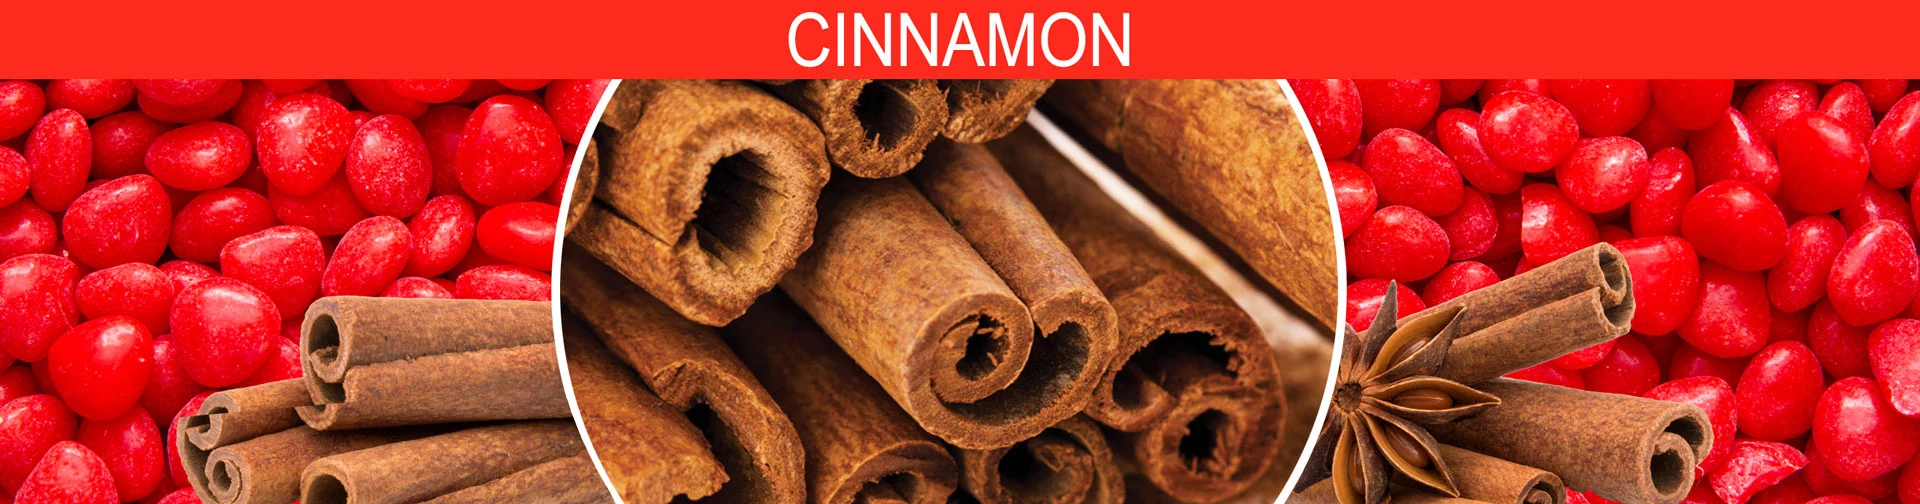 Banner Image of red hot cinnamon candy. Strong cinnamon fragrance, perfect for fall.